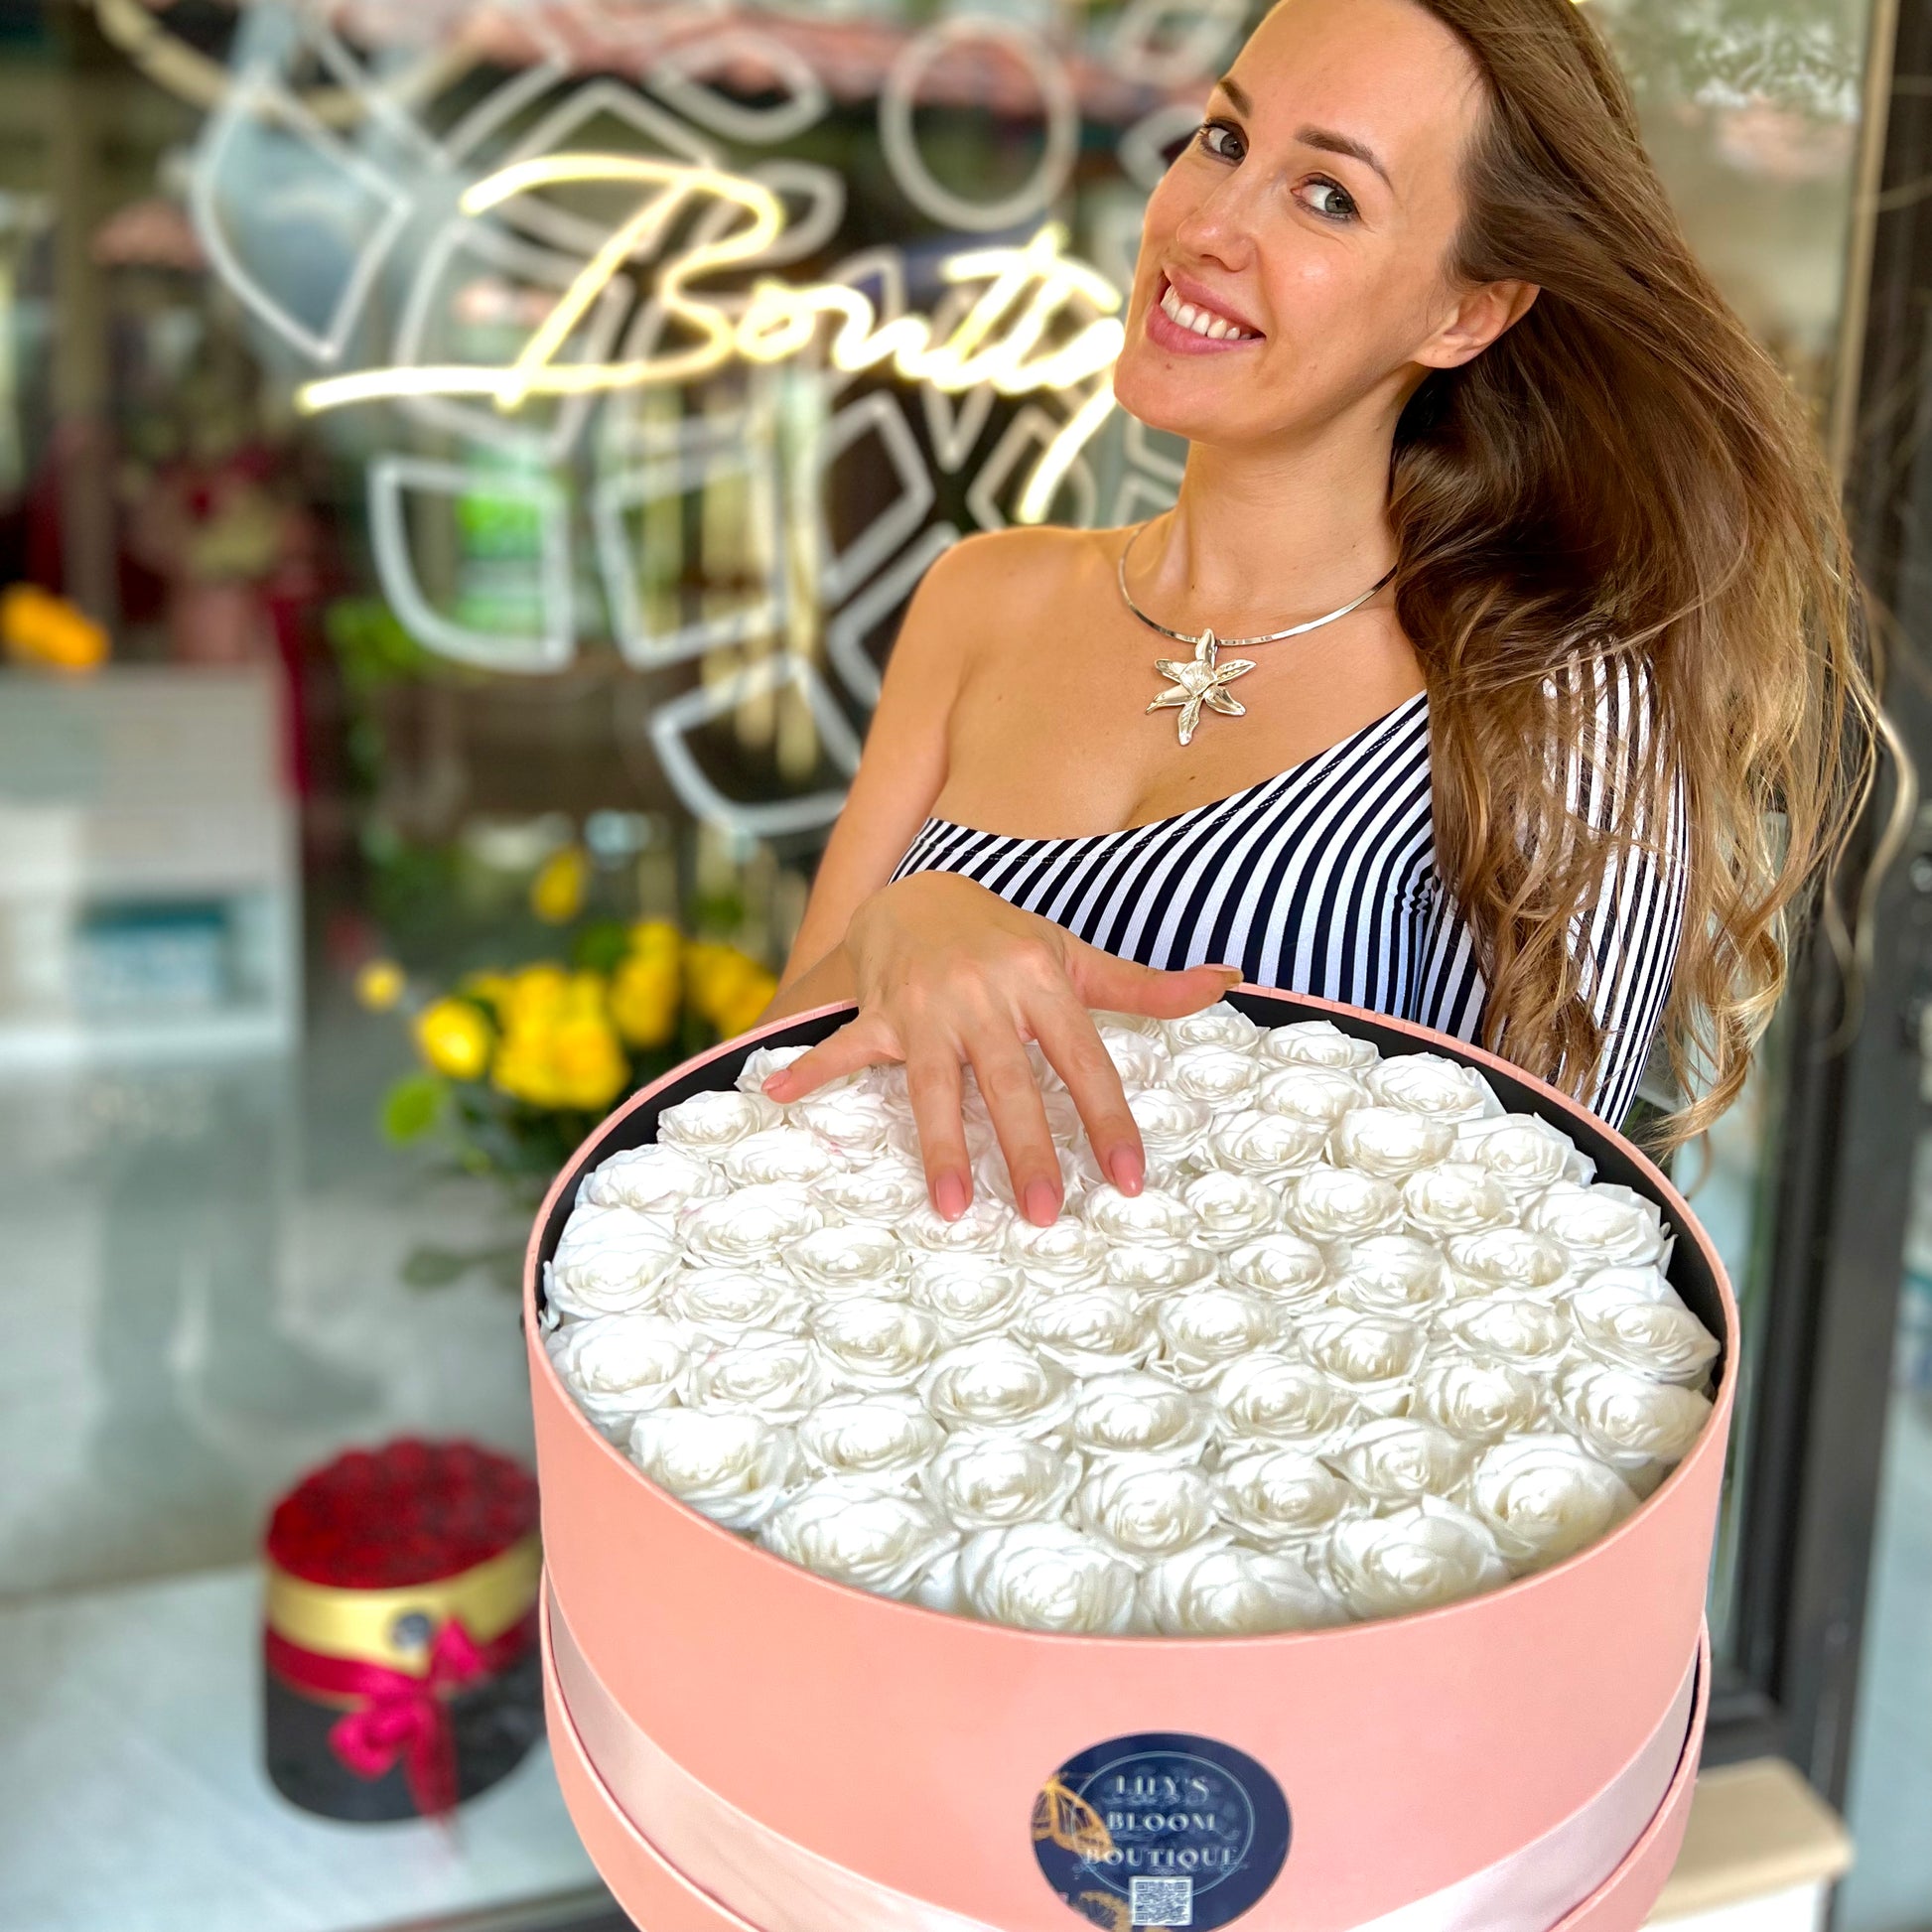 A beautiful smiling woman holds large pink box of white roses